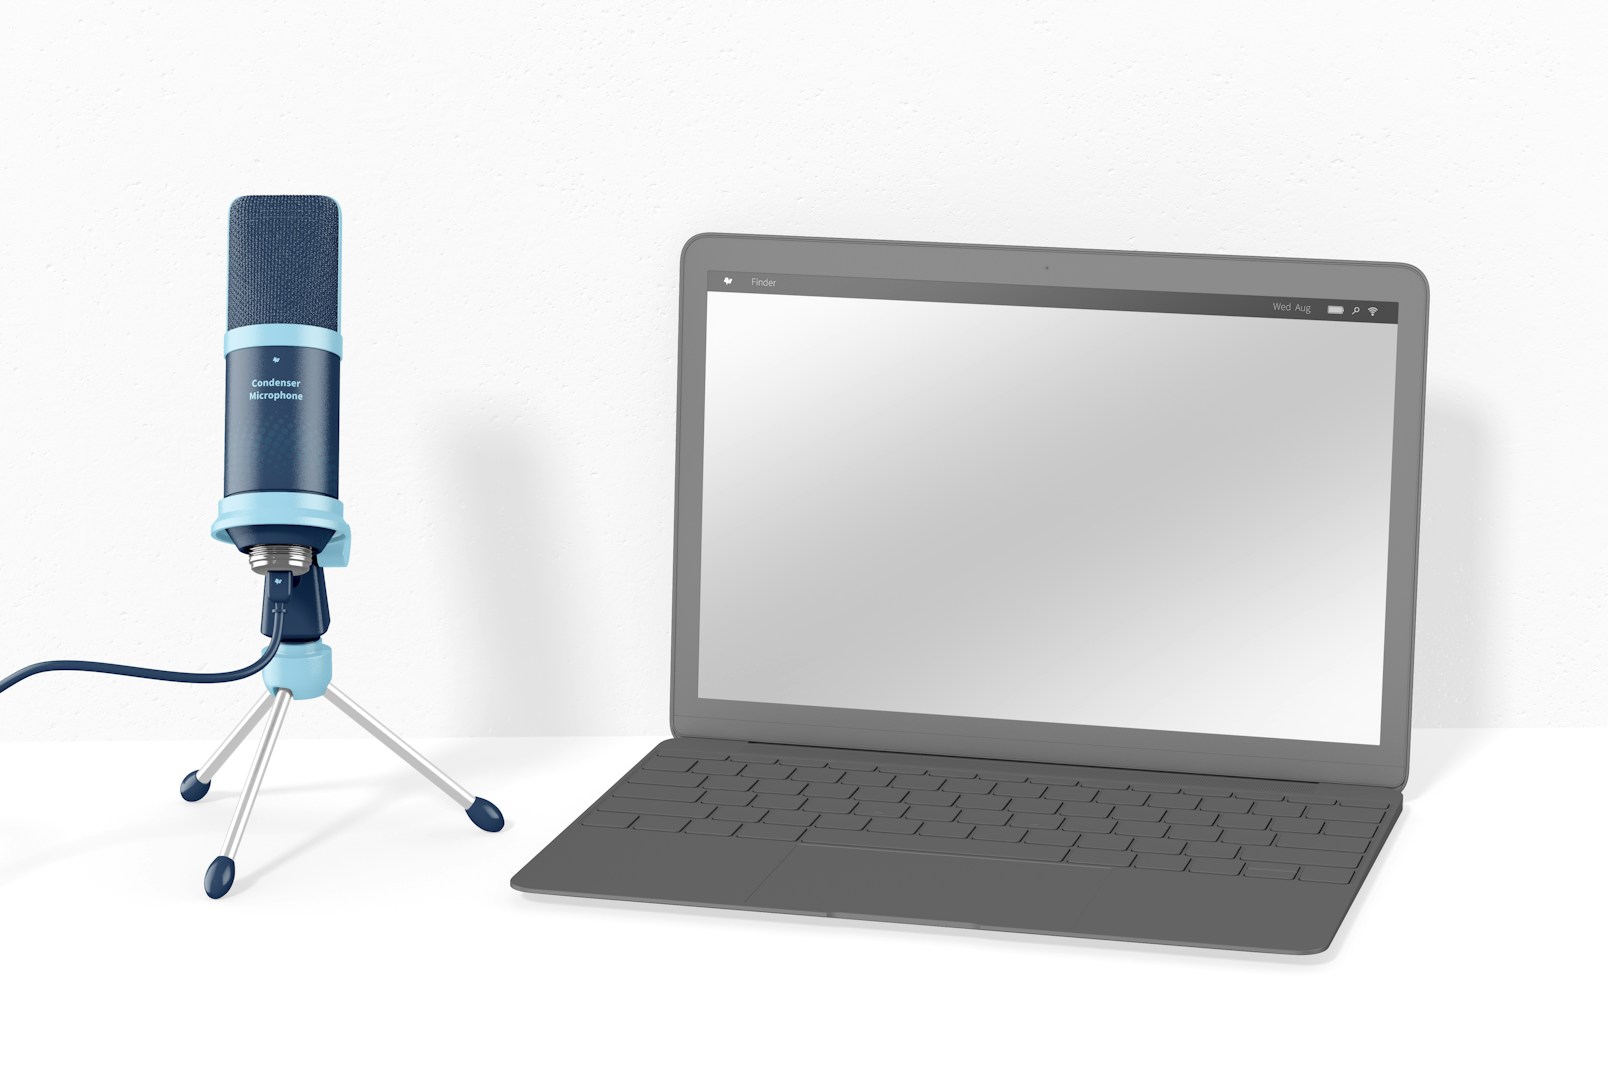 Condenser Microphone with Laptop Mockup